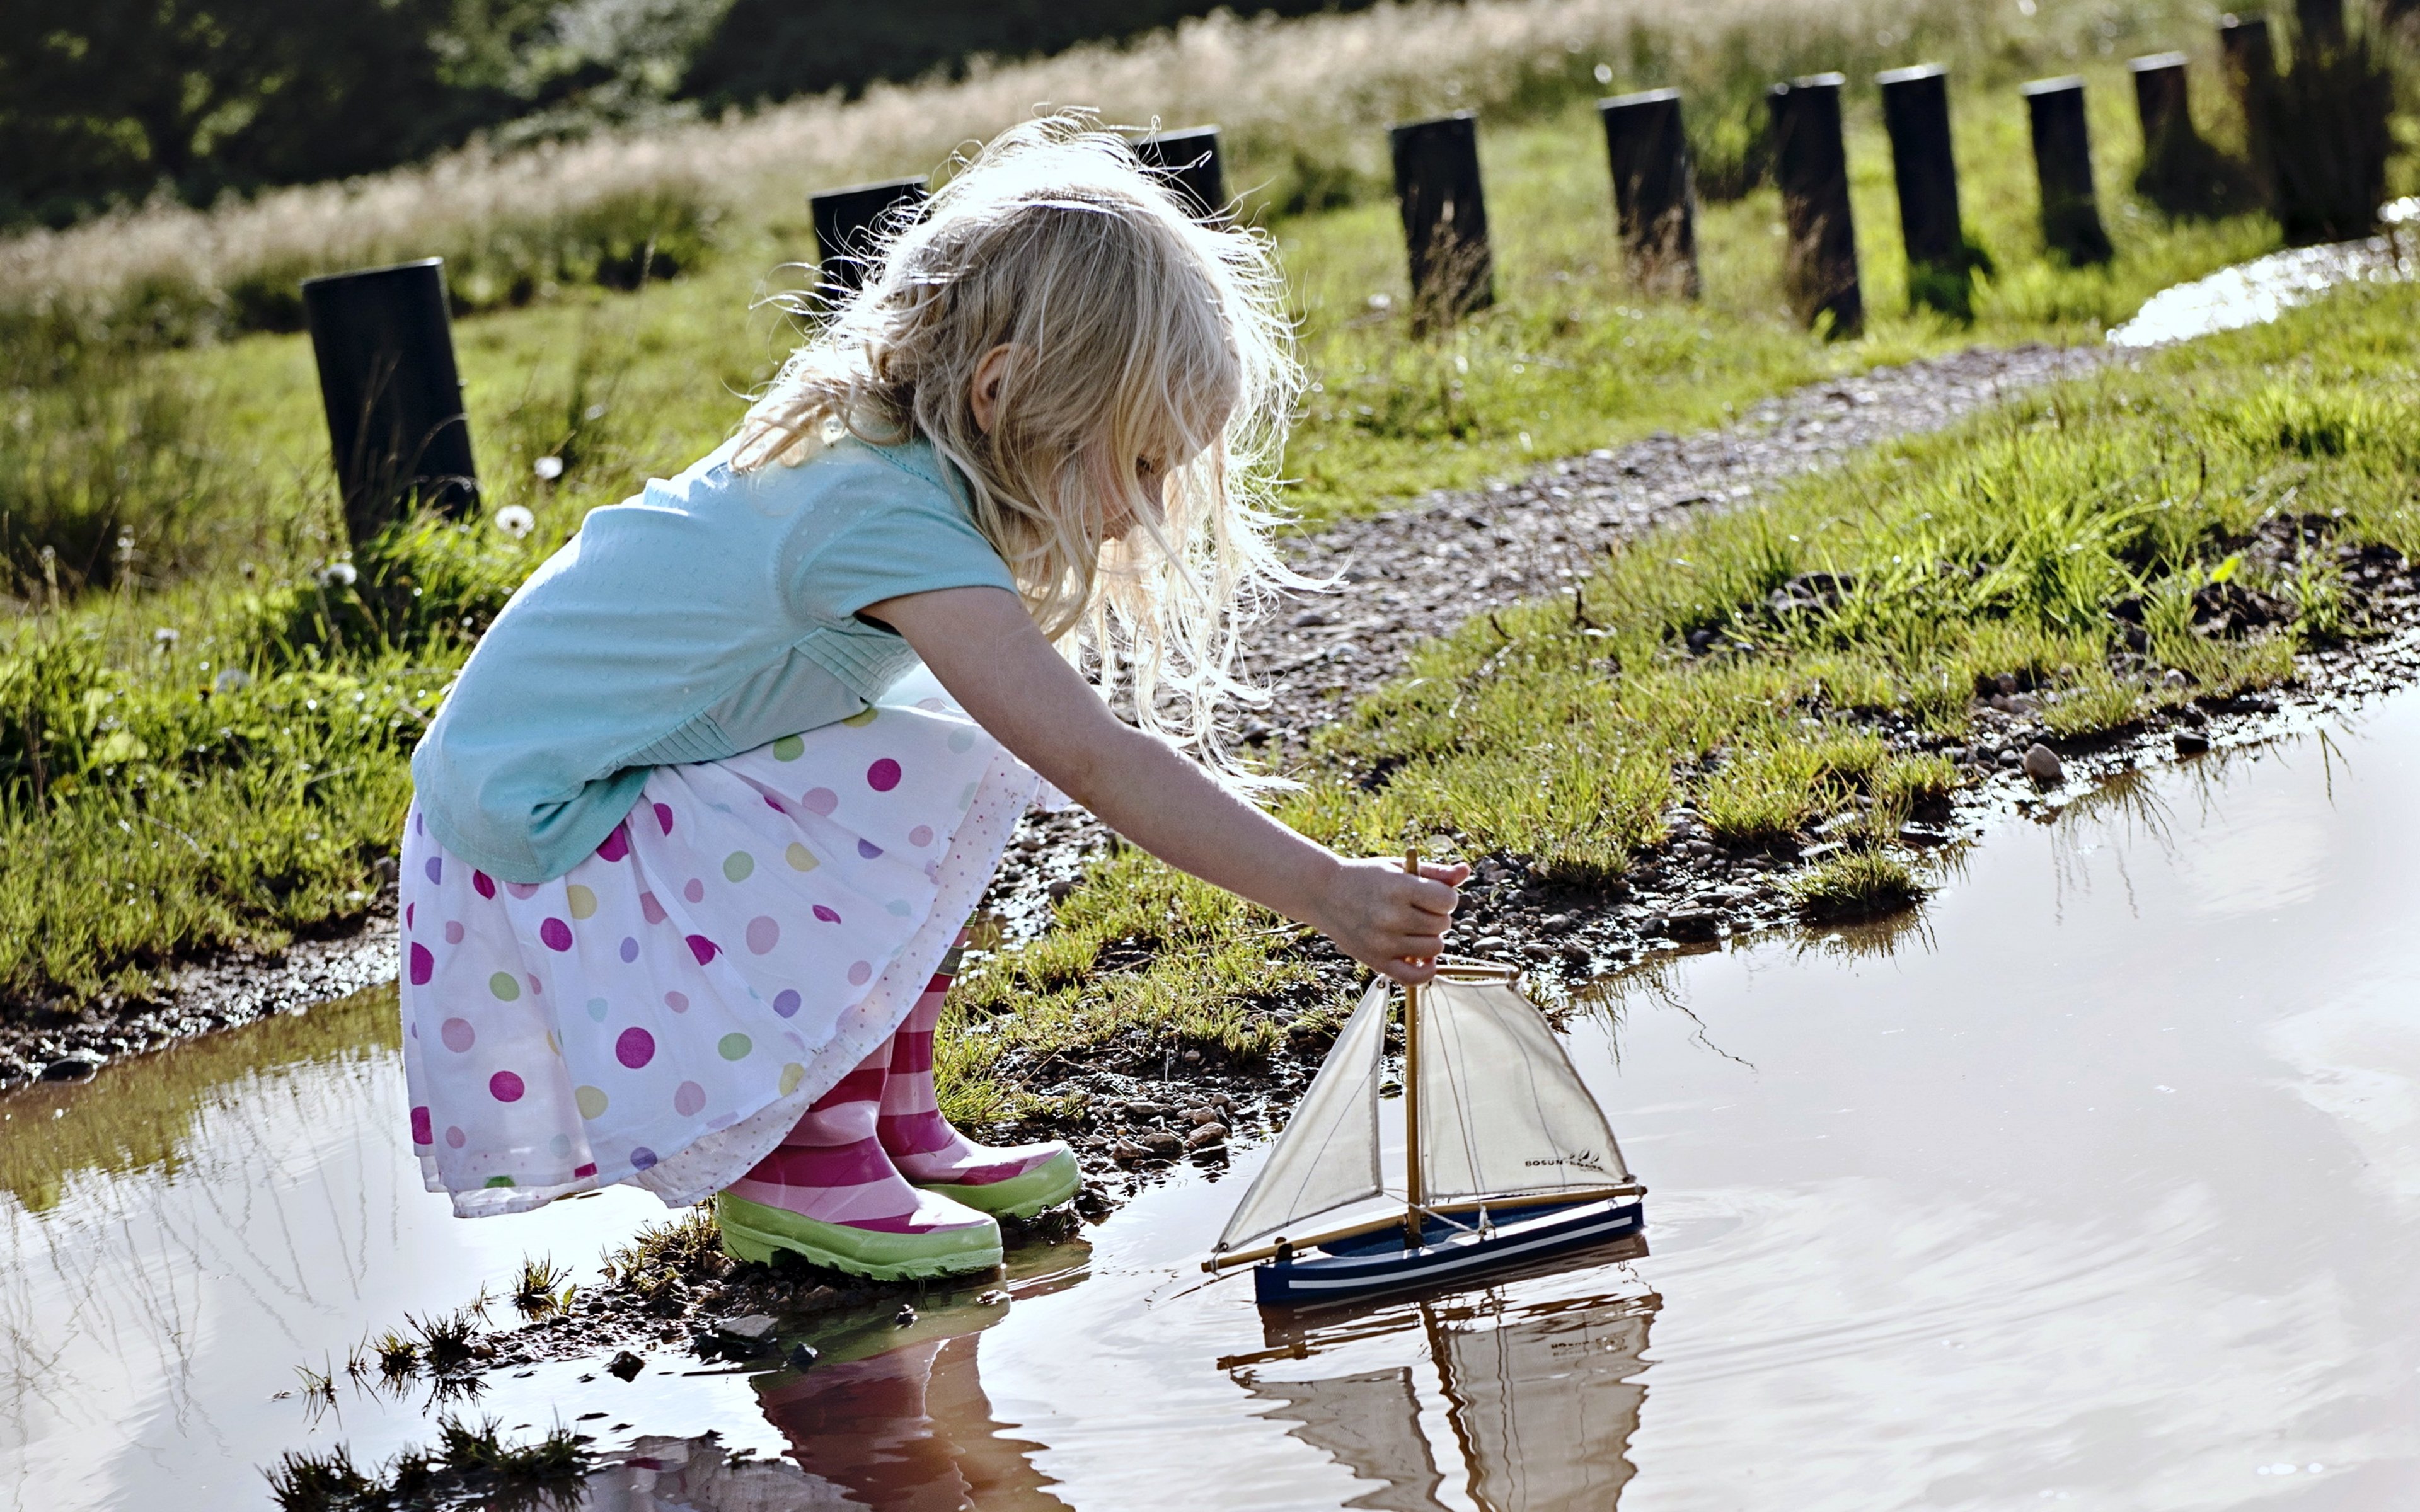 kids, Children, Childhood, Boat, Games, Lakes, Grass, Playing, Joy, Fun, Happy, Life, Nature, Landscapes, Earth, Water, Little Wallpaper